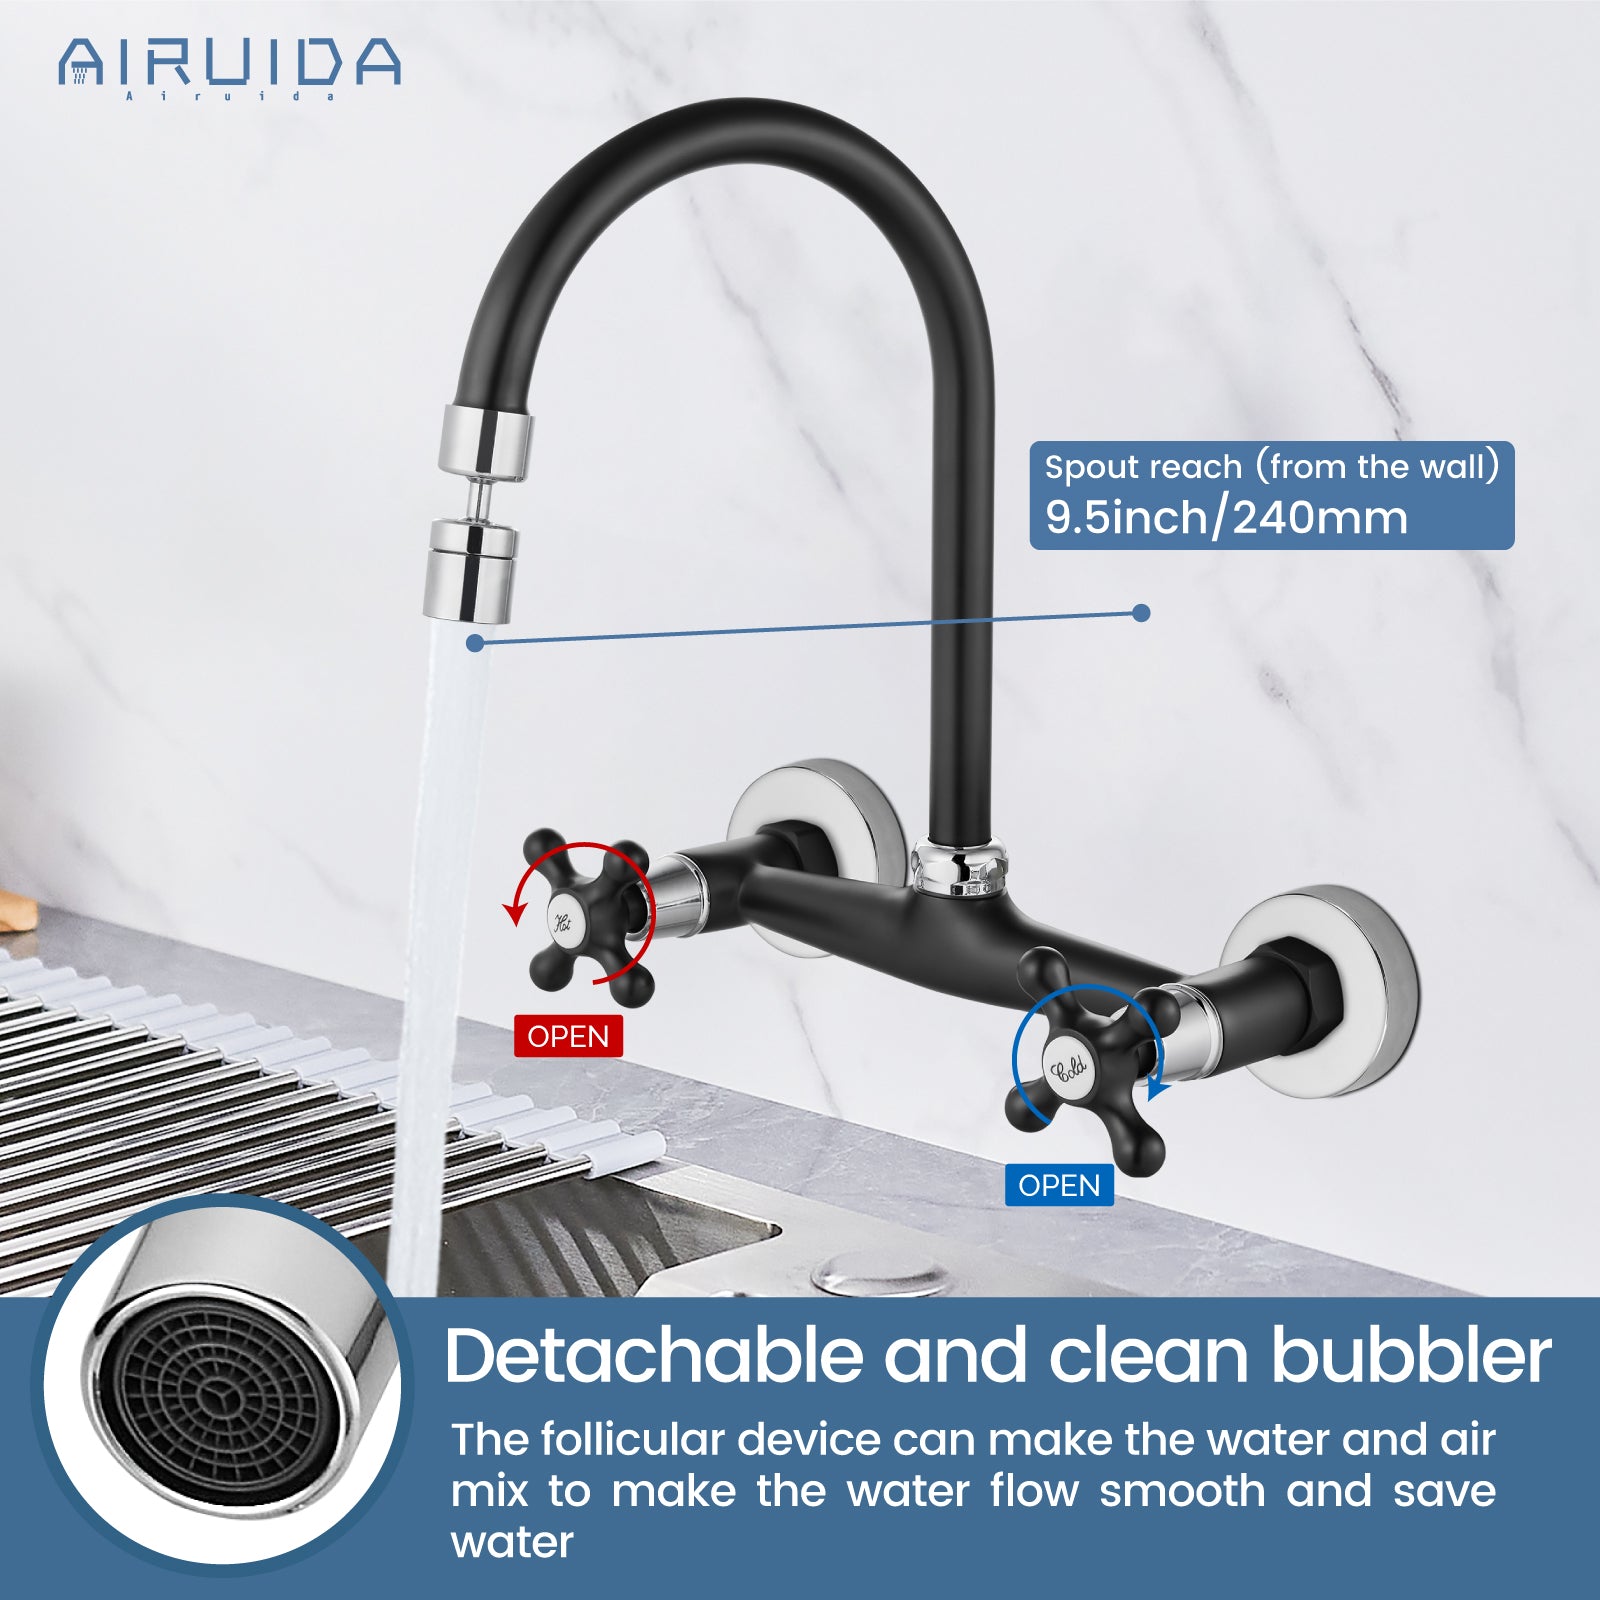 Airuida Matte Black & Polished Chrome Wall Mount Faucet with Sprayer Commercial Kitchen Faucet 8 Inch Center Utility Sink Faucet 360 Degree Swivel Spout Restaurant Sinks Laundry Room Faucet